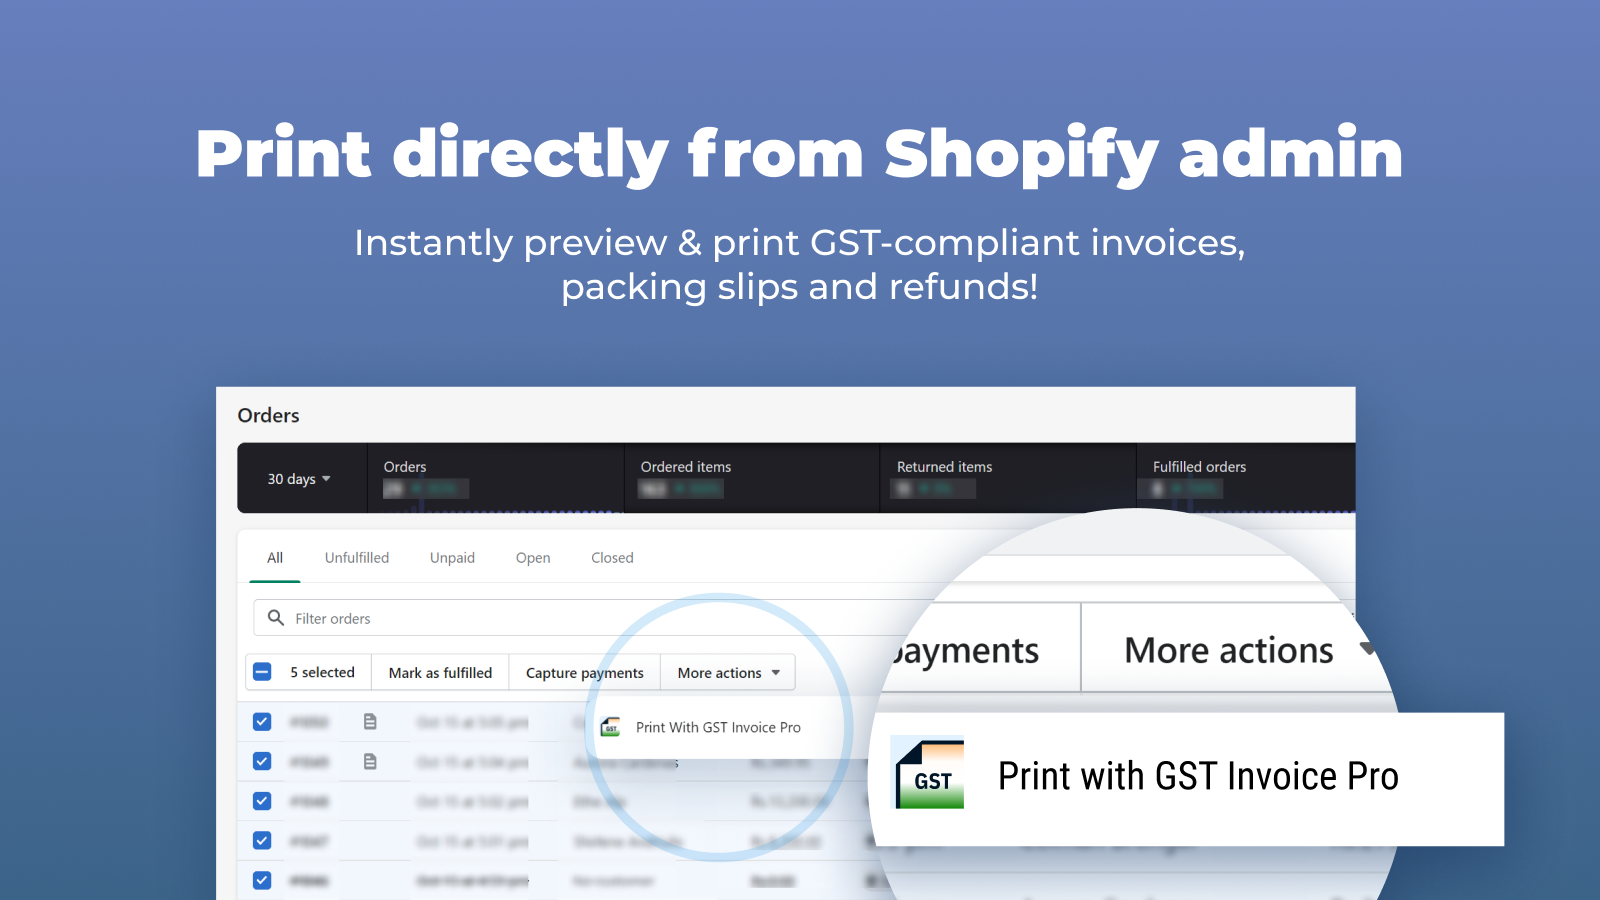 Access from admin using Print with GST Invoice Pro